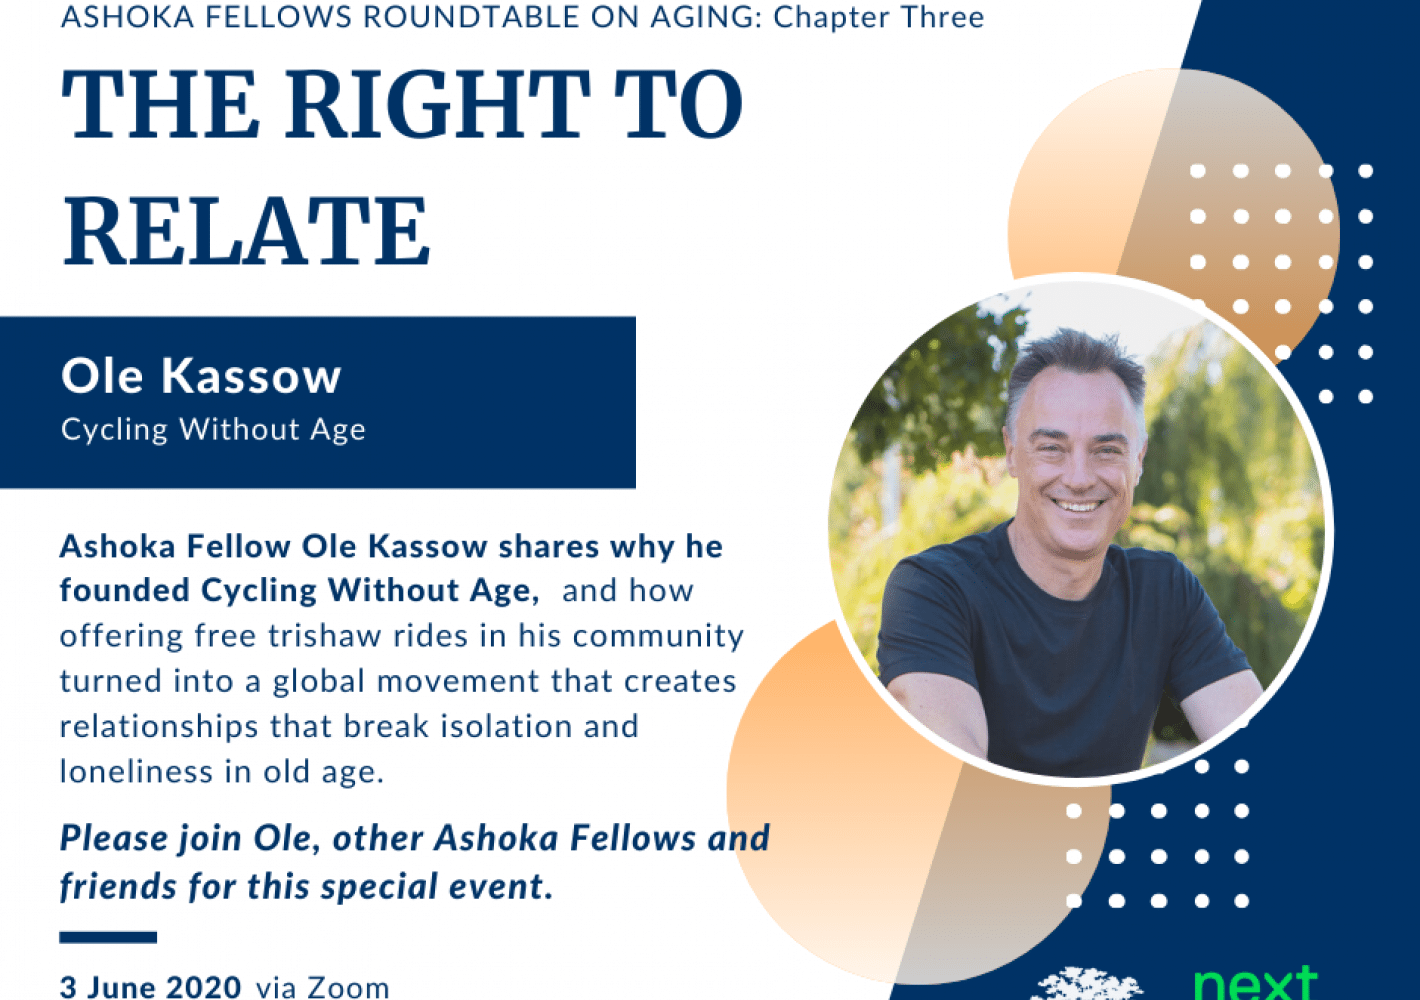 Ole Kassow: The Right To Relate